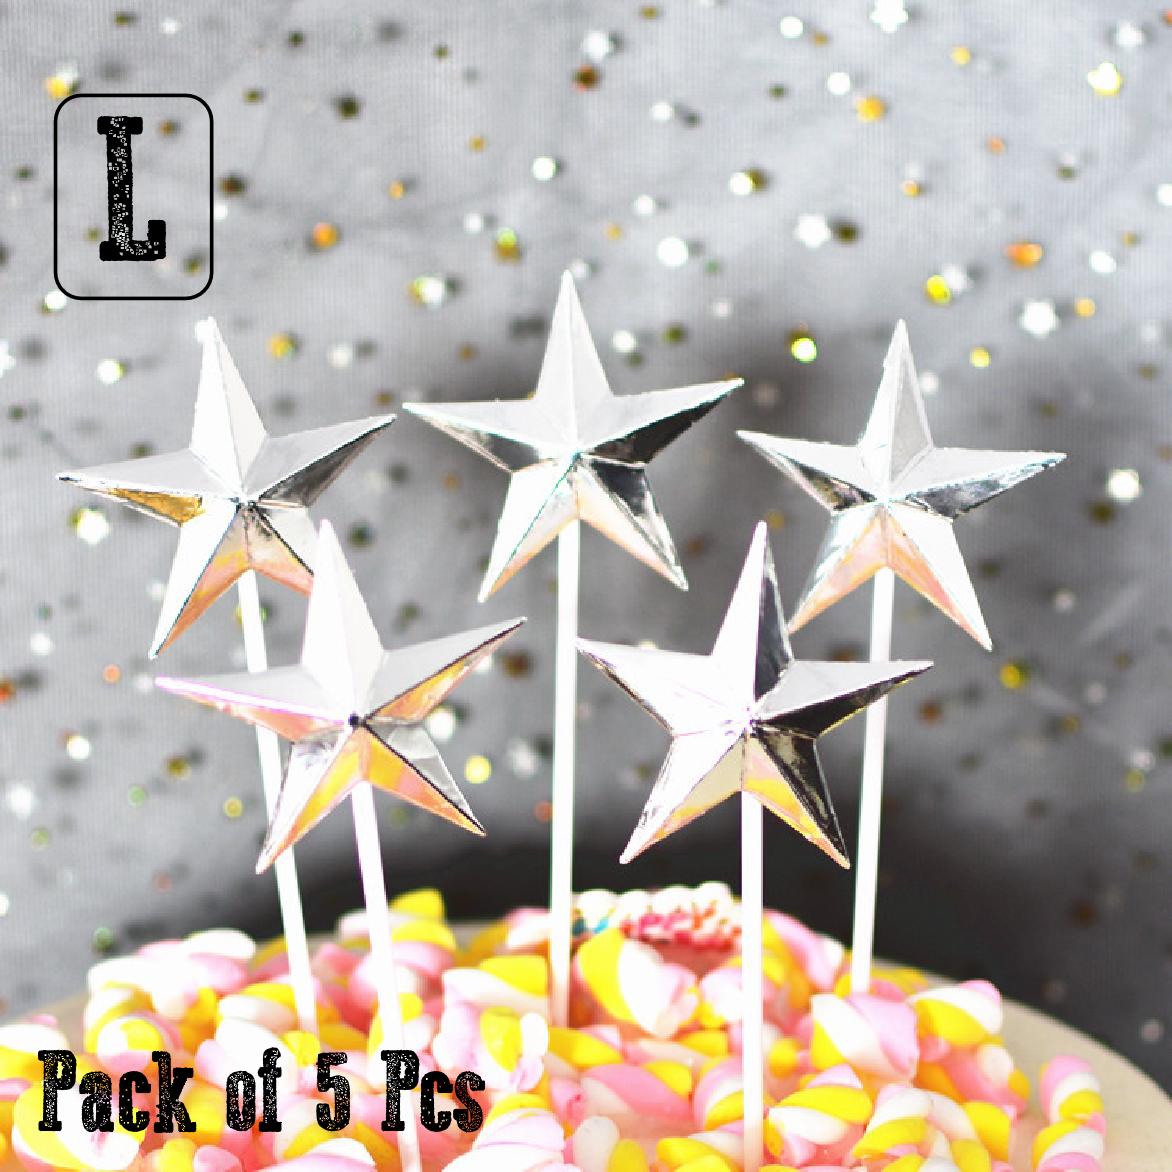 Cake Cup Cake Topper Decorations - Silver stars (large) - Rampant Coffee Company